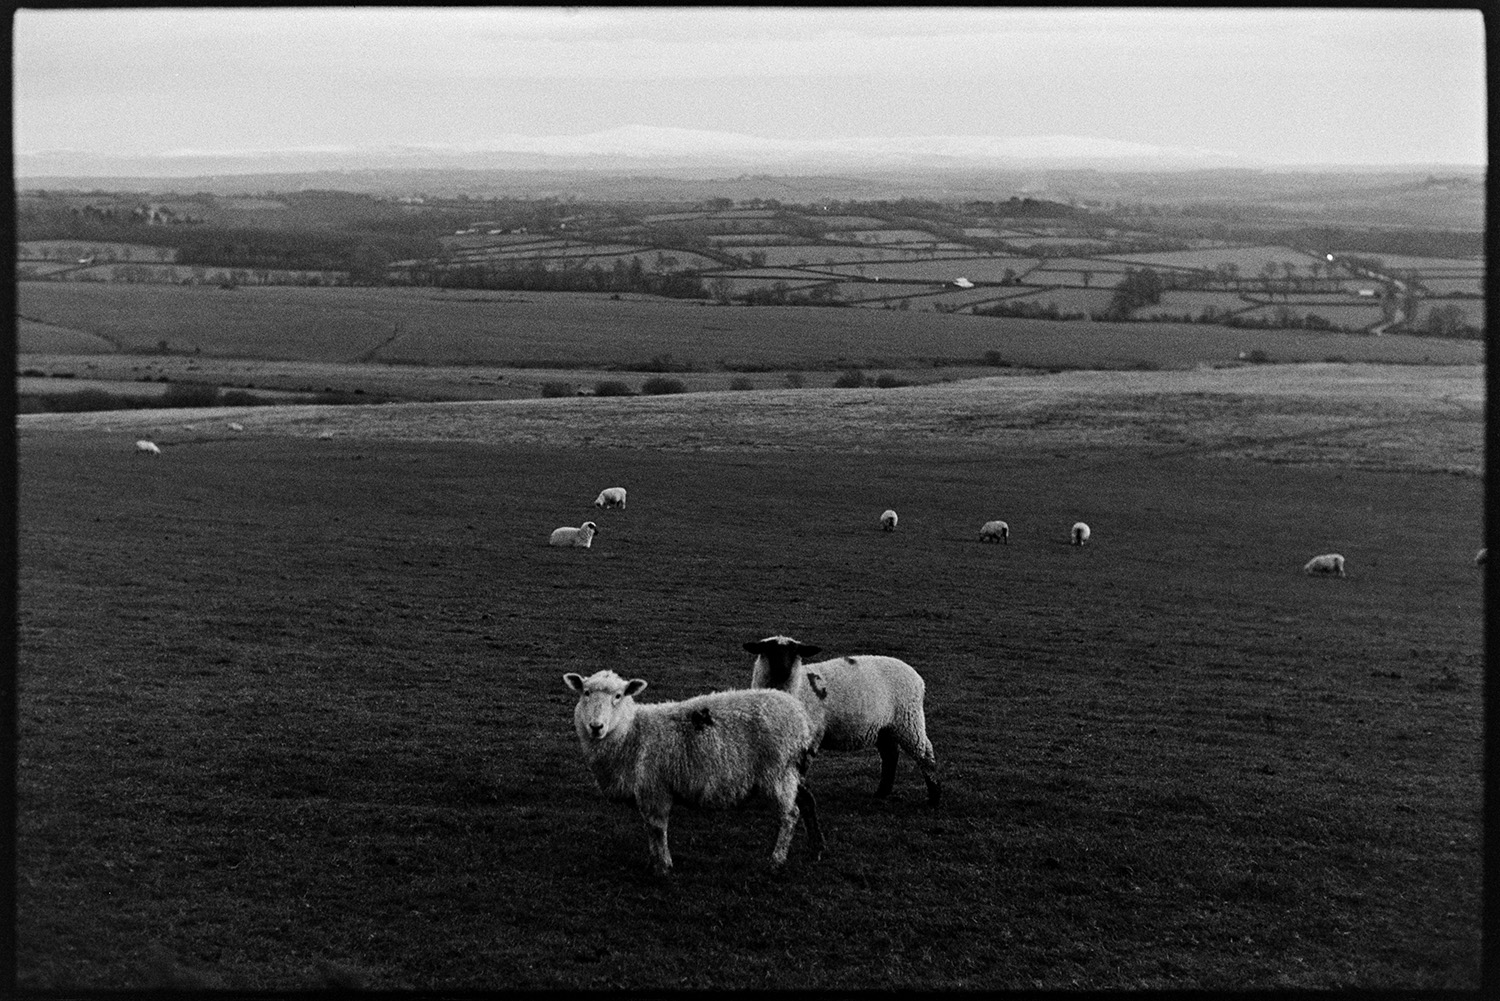 Moor with sheep evening. 
[Sheep grazing on Hatherleigh Moor in the evening. A landscape of fields and trees is visible in the background.]